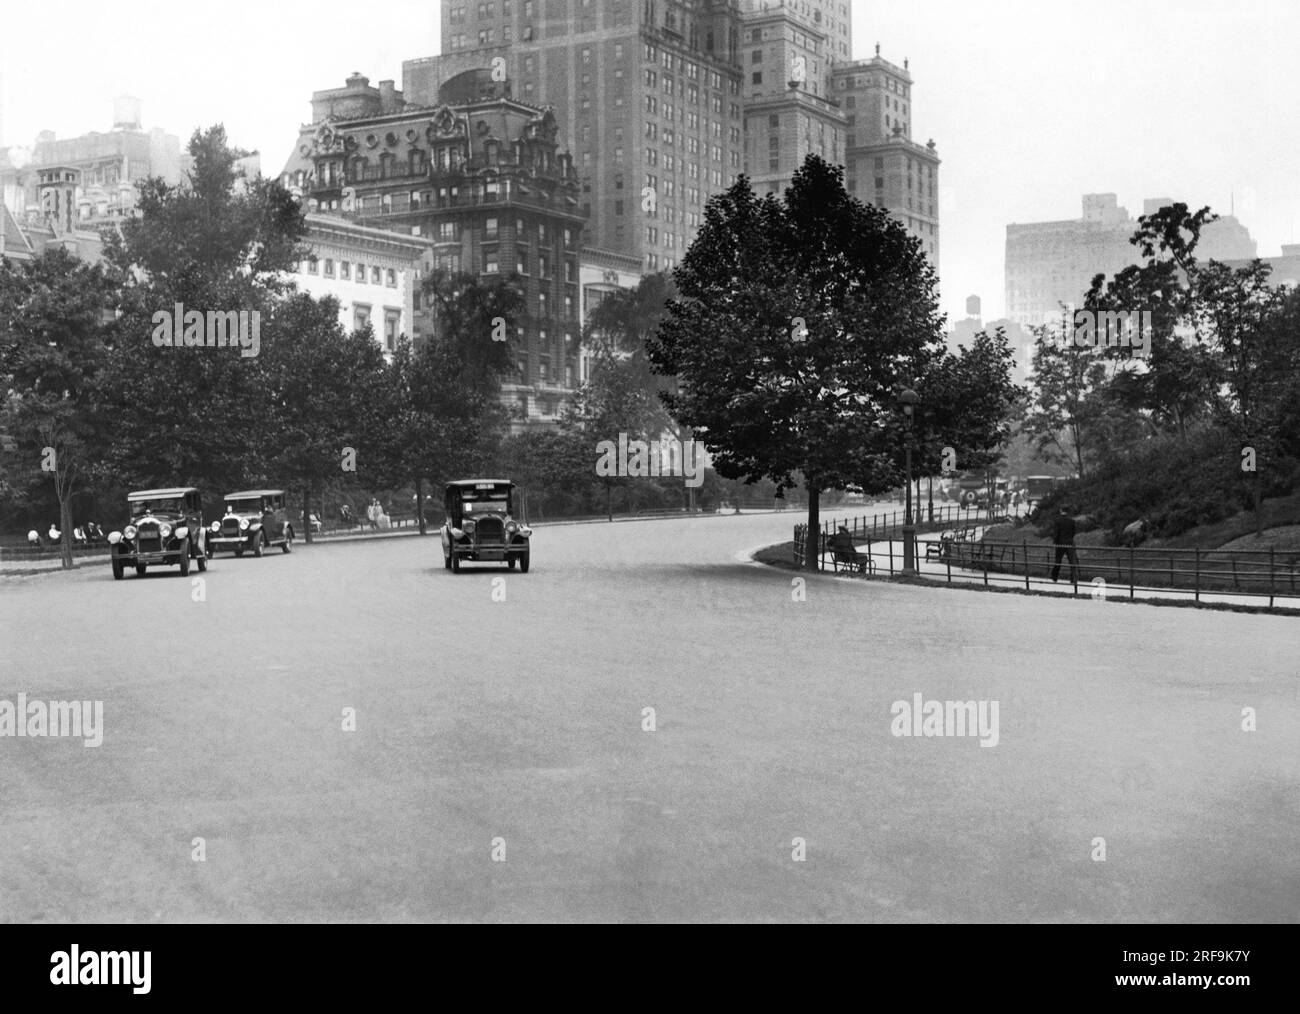 New York  New York:   c. 1928 Skirting Manhattan's famed Central Park, 59th Street opens into a wide boulevard.  The Essex Hotel is shown in the background with Hampshire House in front. Stock Photo